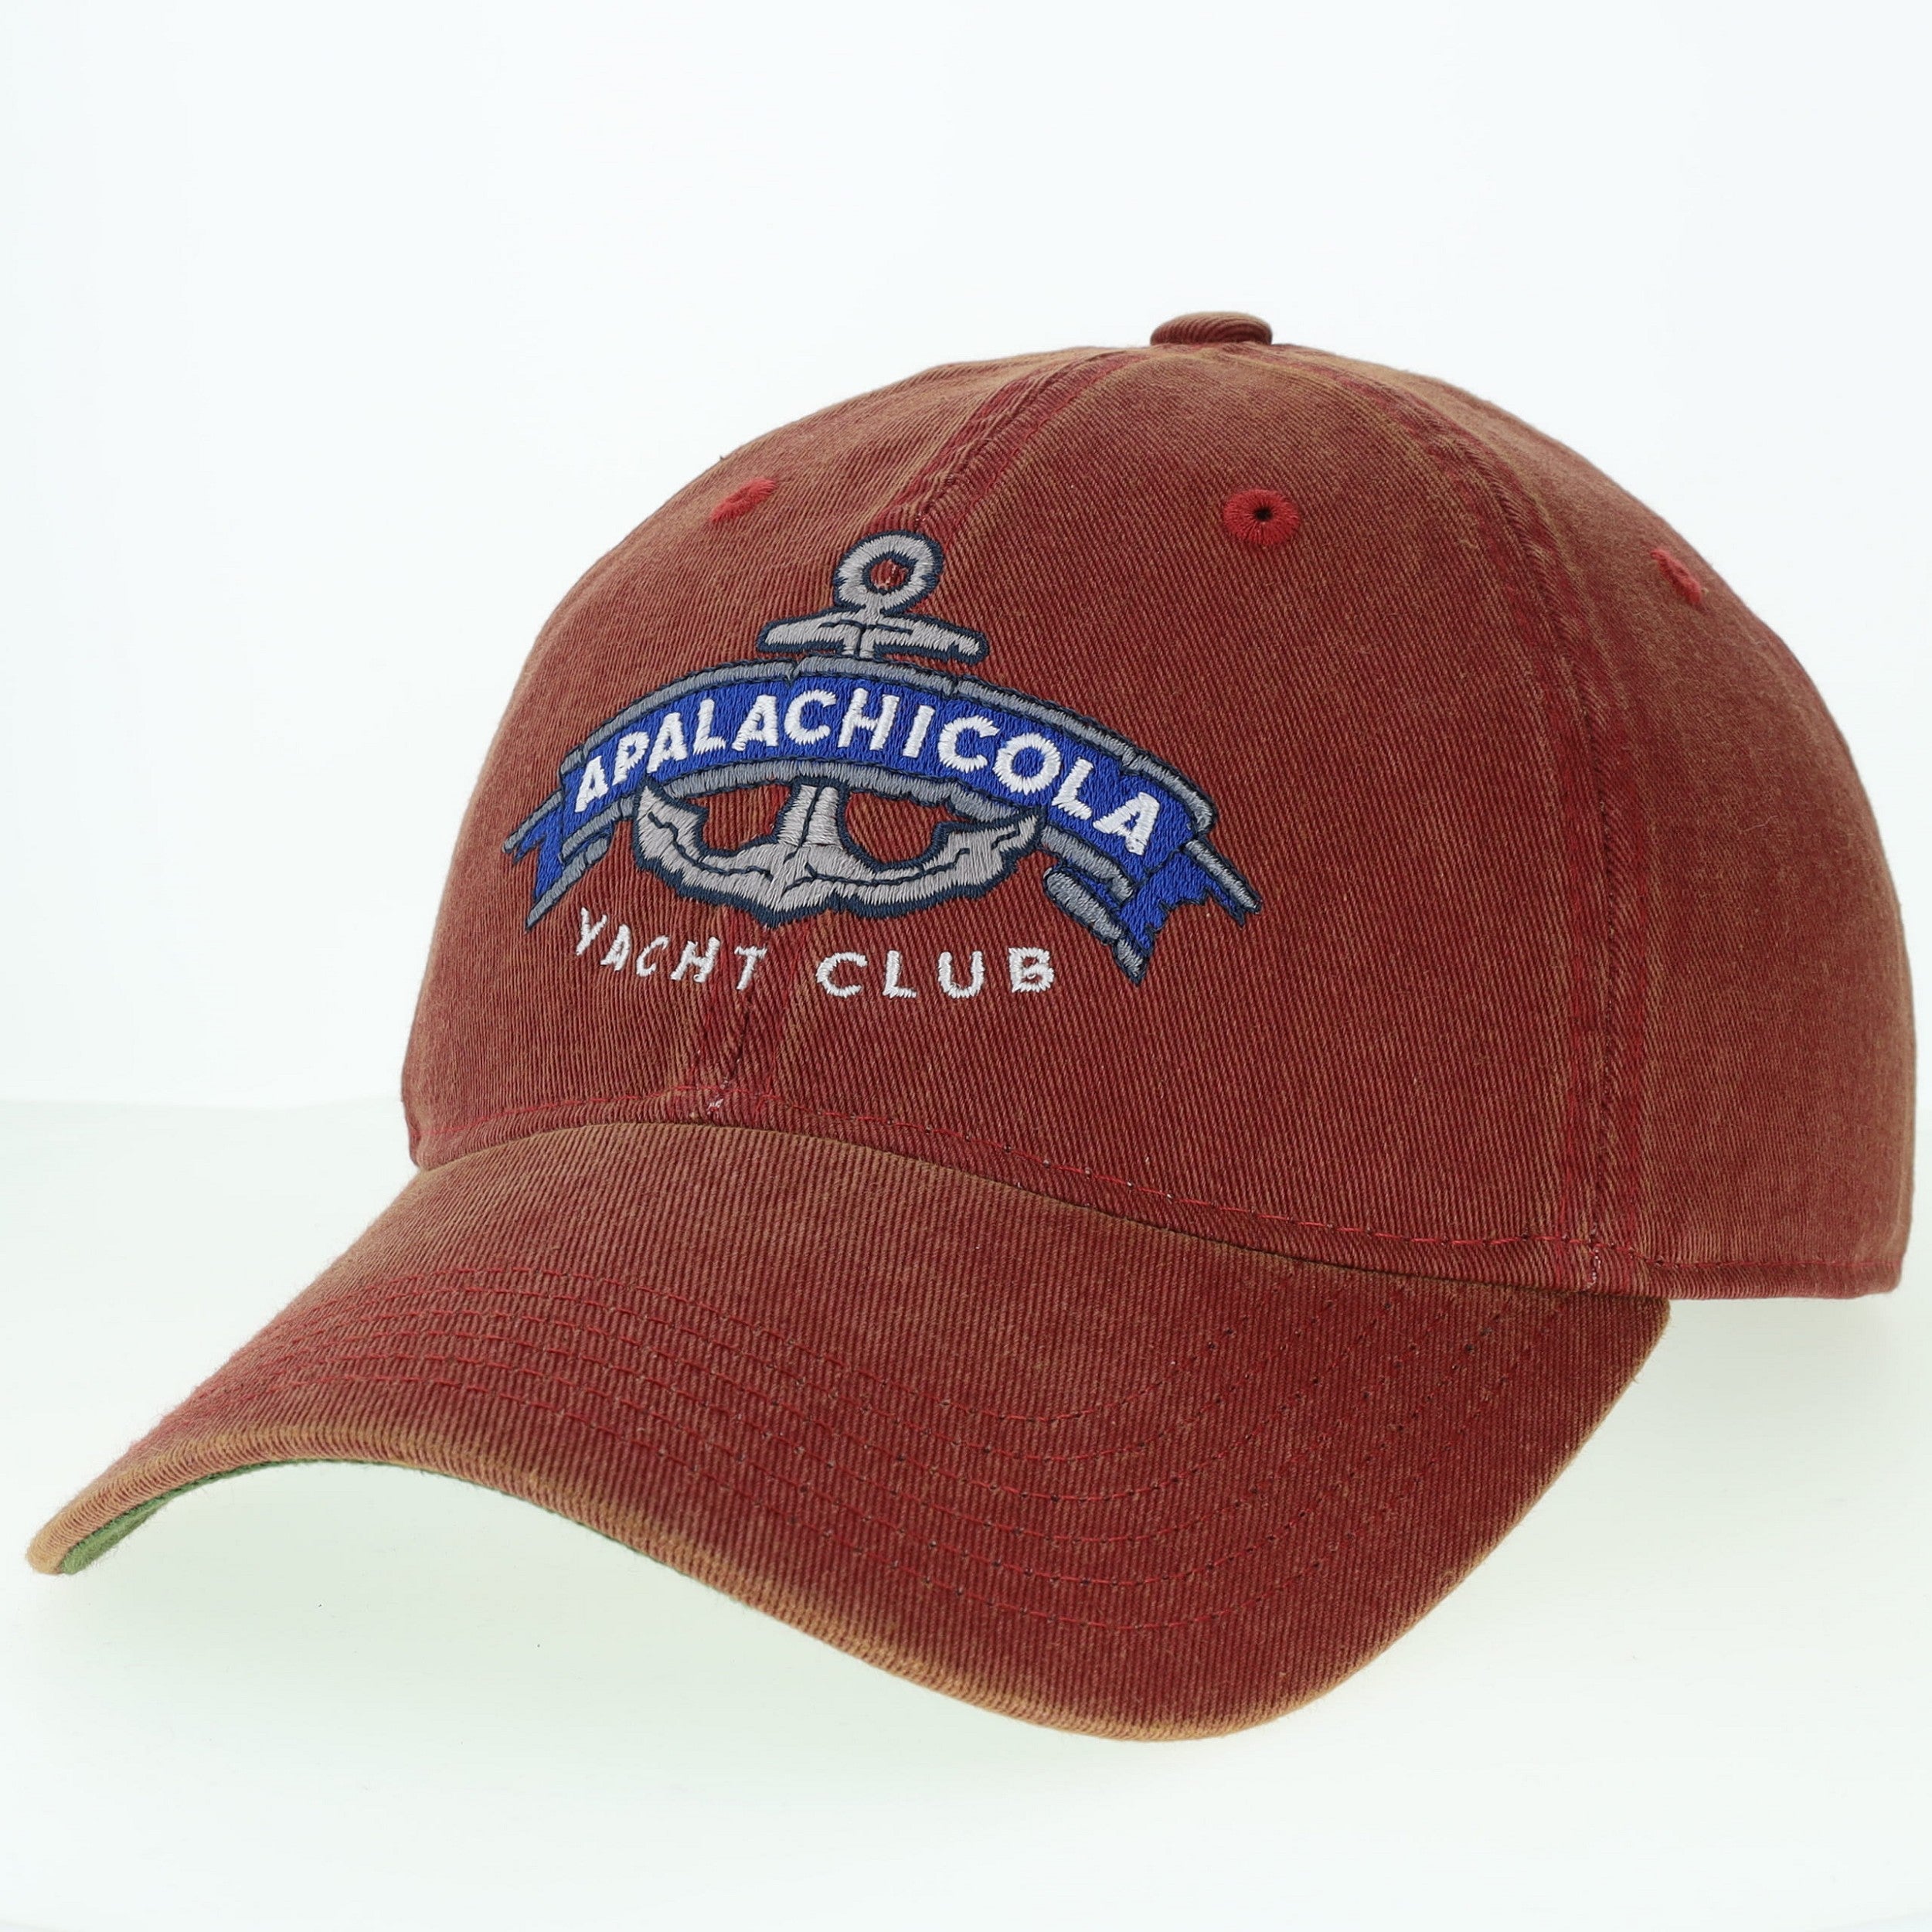 AYC Old Favorite Solid - Cardinal – Apalachicola Yacht Club